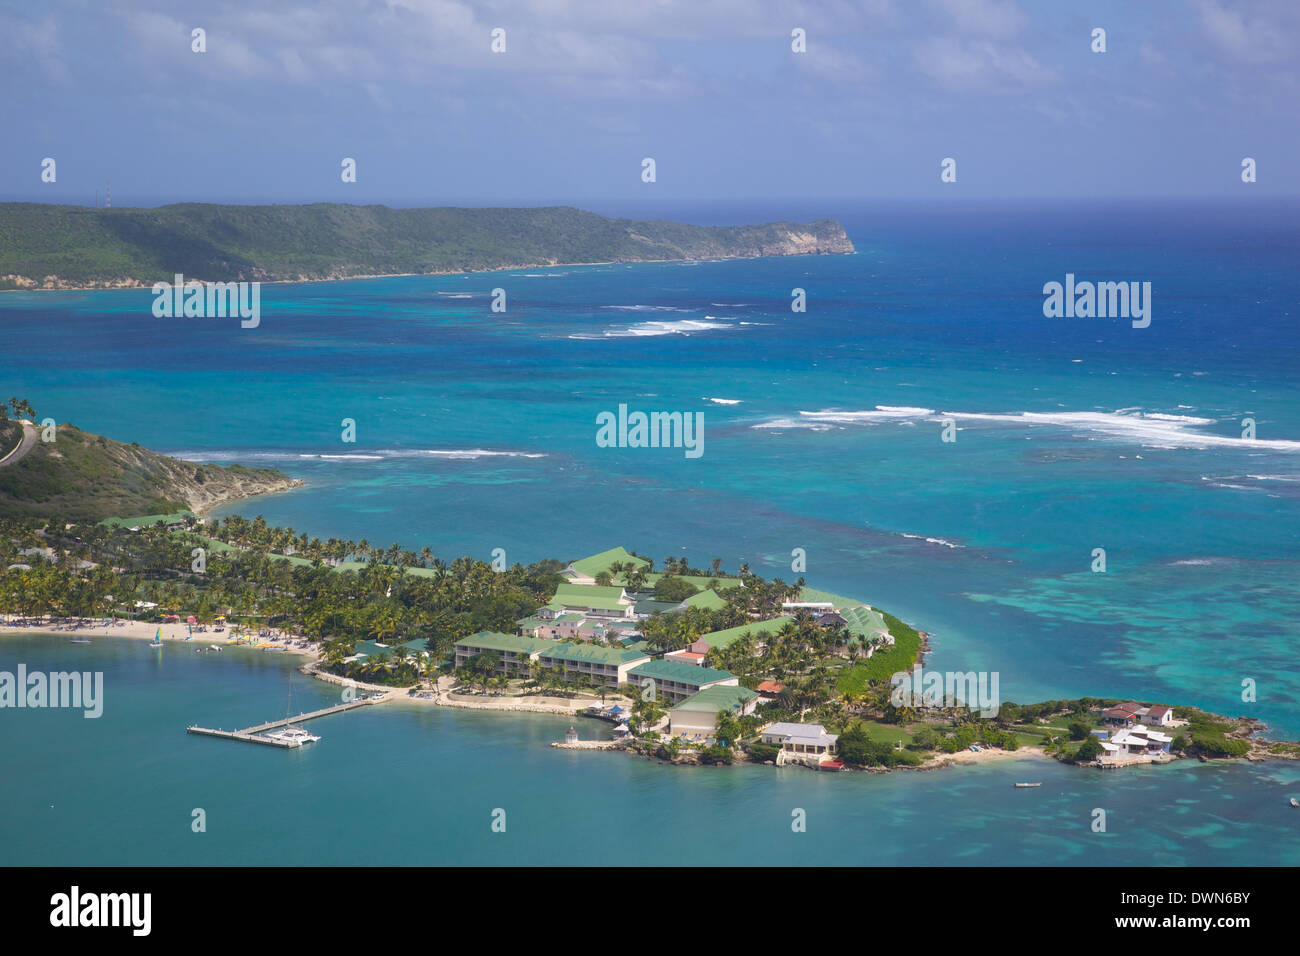 View of Mamora Bay and St. James Club, Antigua, Leeward Islands, West Indies, Caribbean, Central America Stock Photo